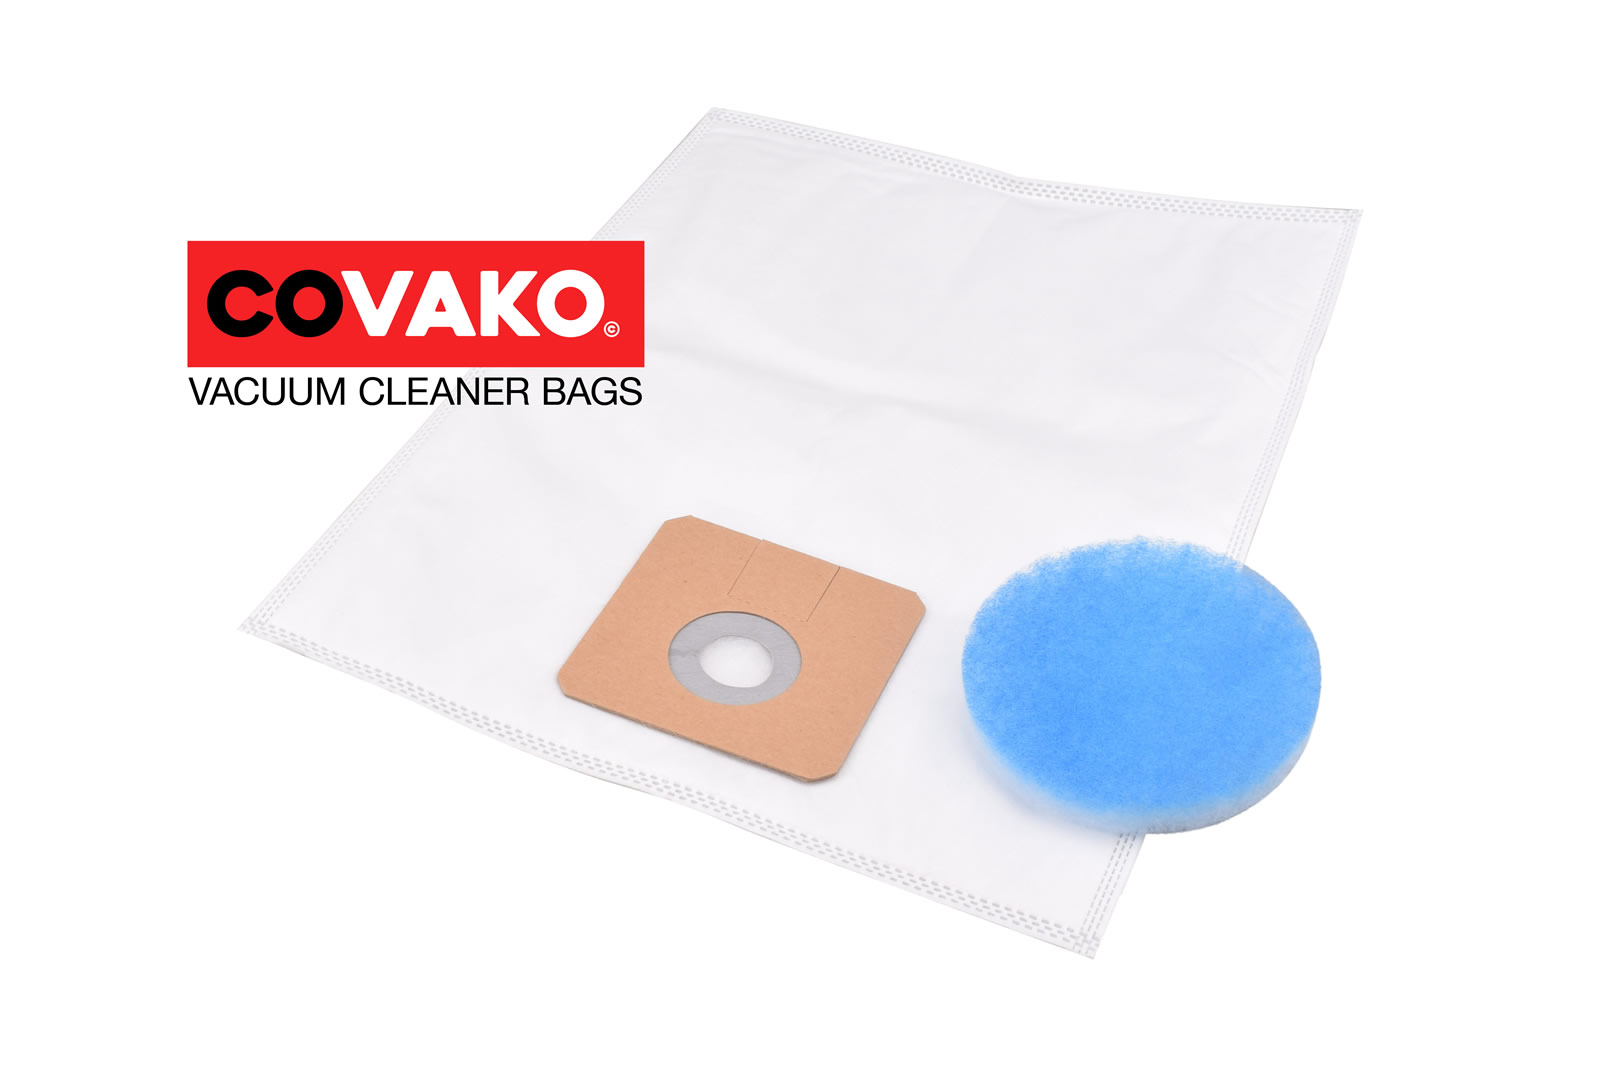 Clean a la Card RS 09 / Synthesis - Clean a la Card vacuum cleaner bags